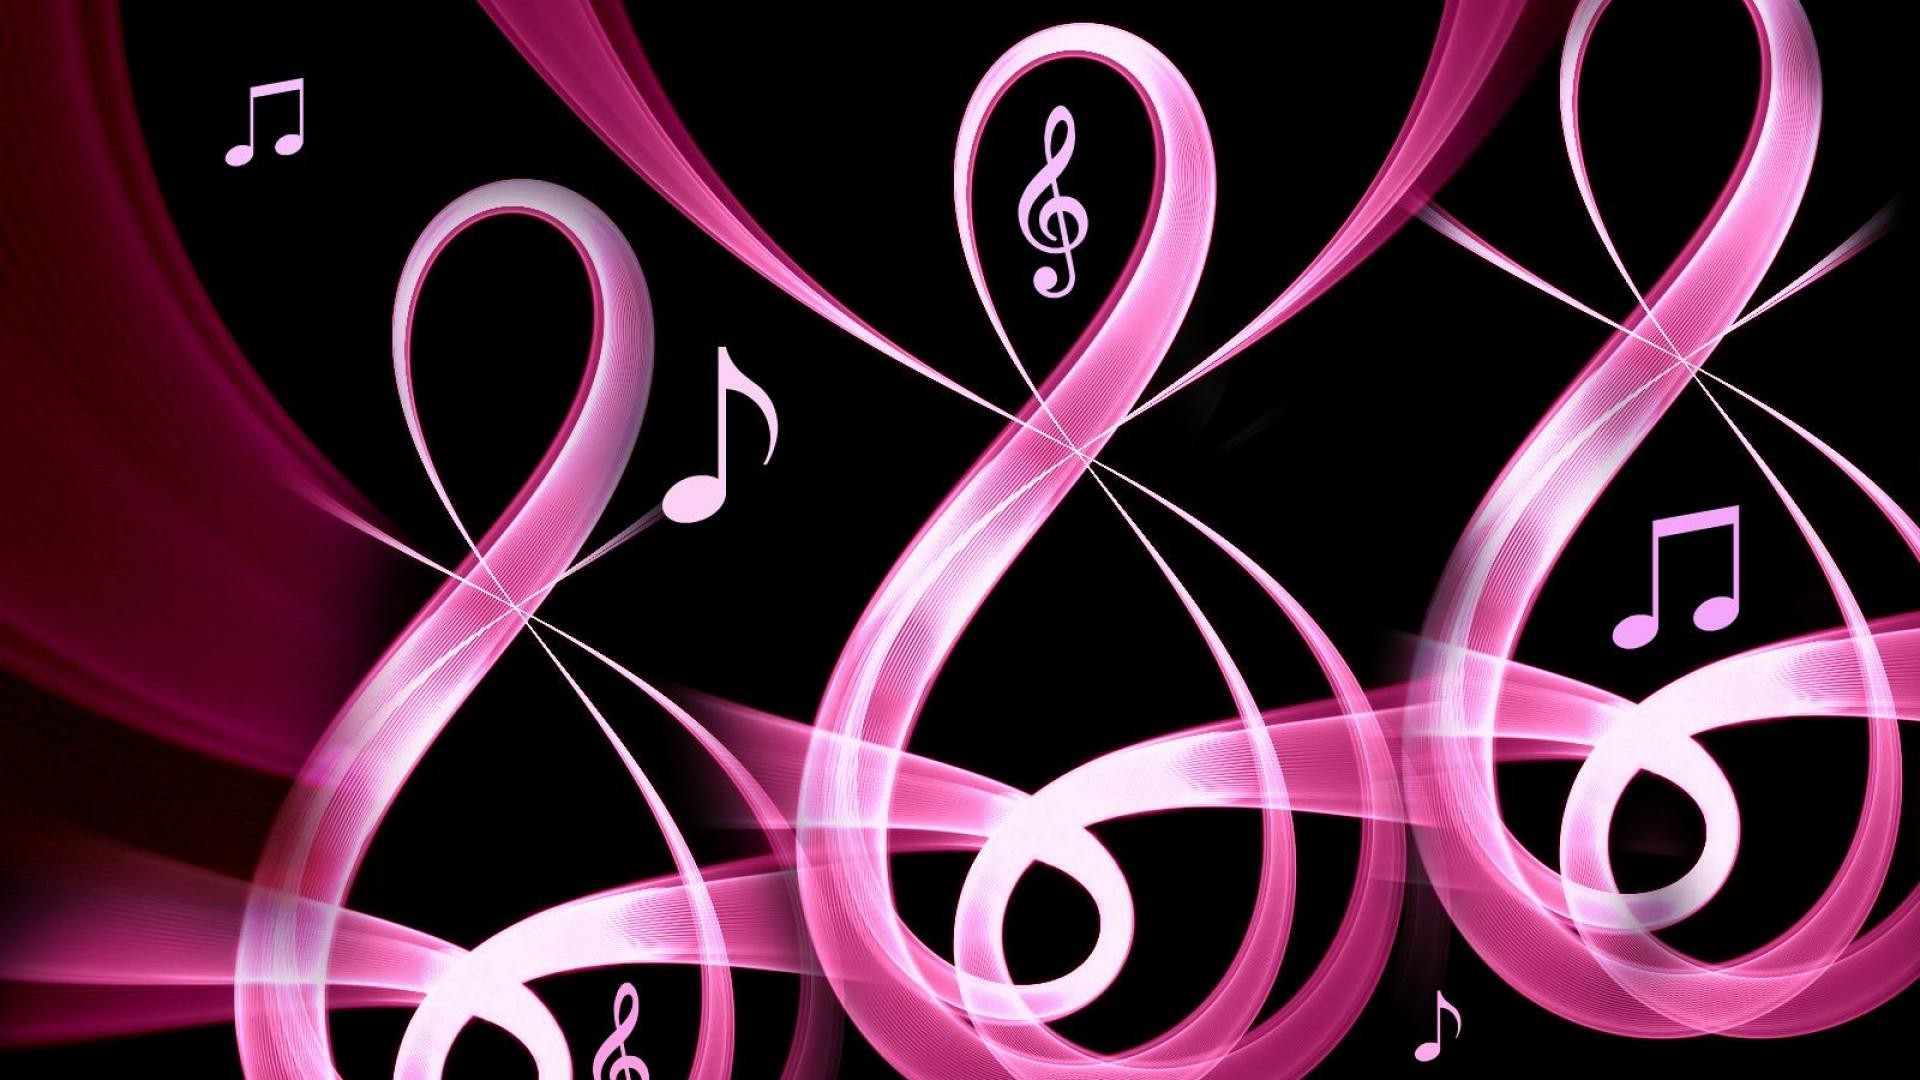 Musical Notes Wallpapers 69 Pictures 4918